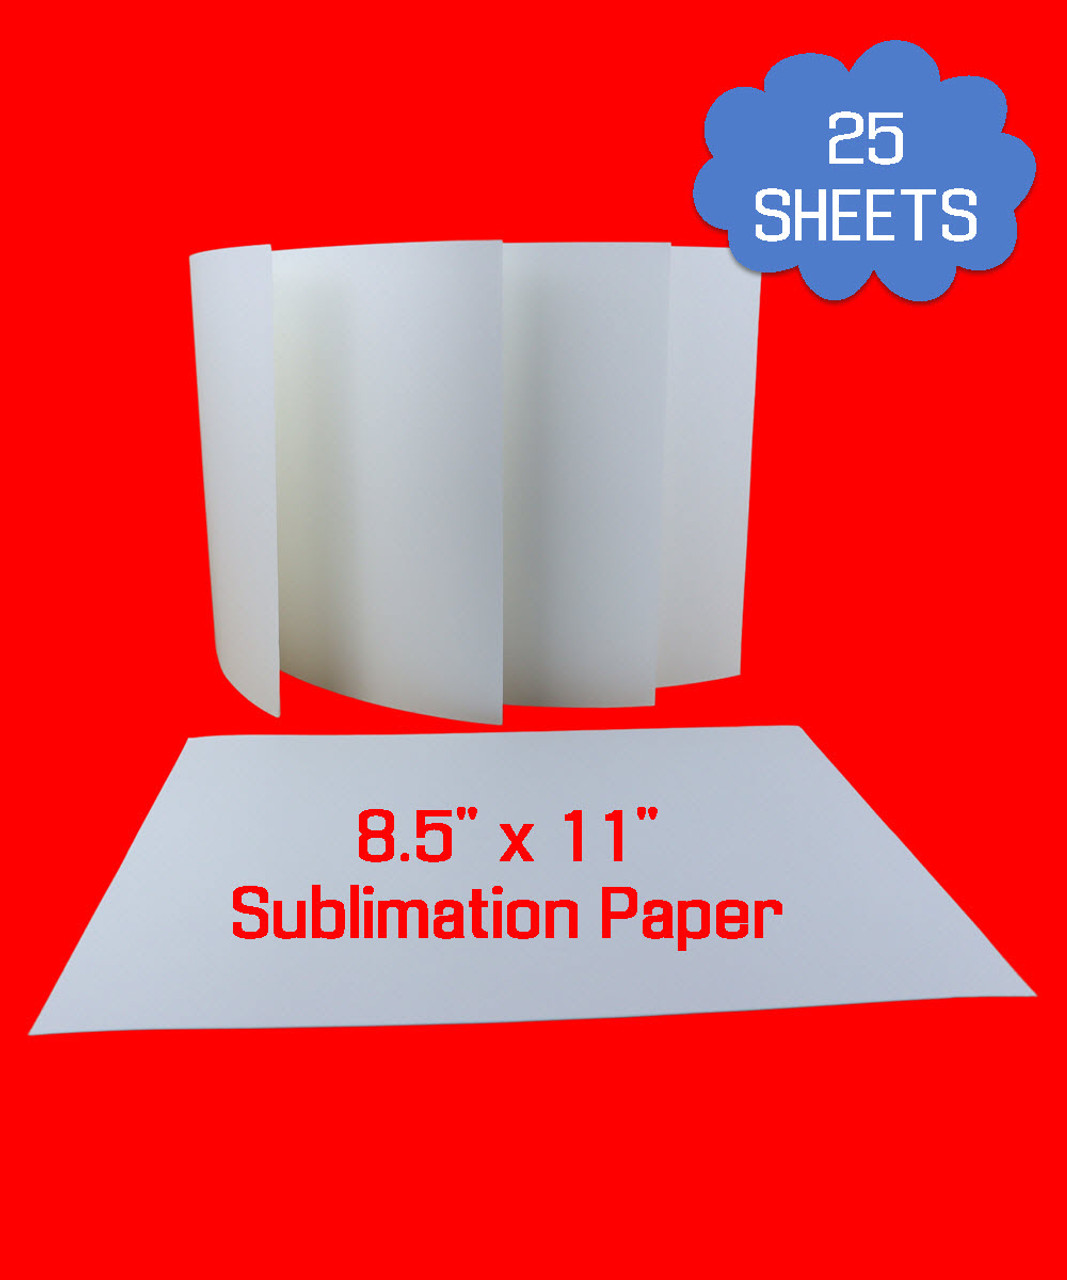 8.5 x 11 inch Sublimation Paper Lay Flat NO CURL paper 120GSM 25 Sheet Package
